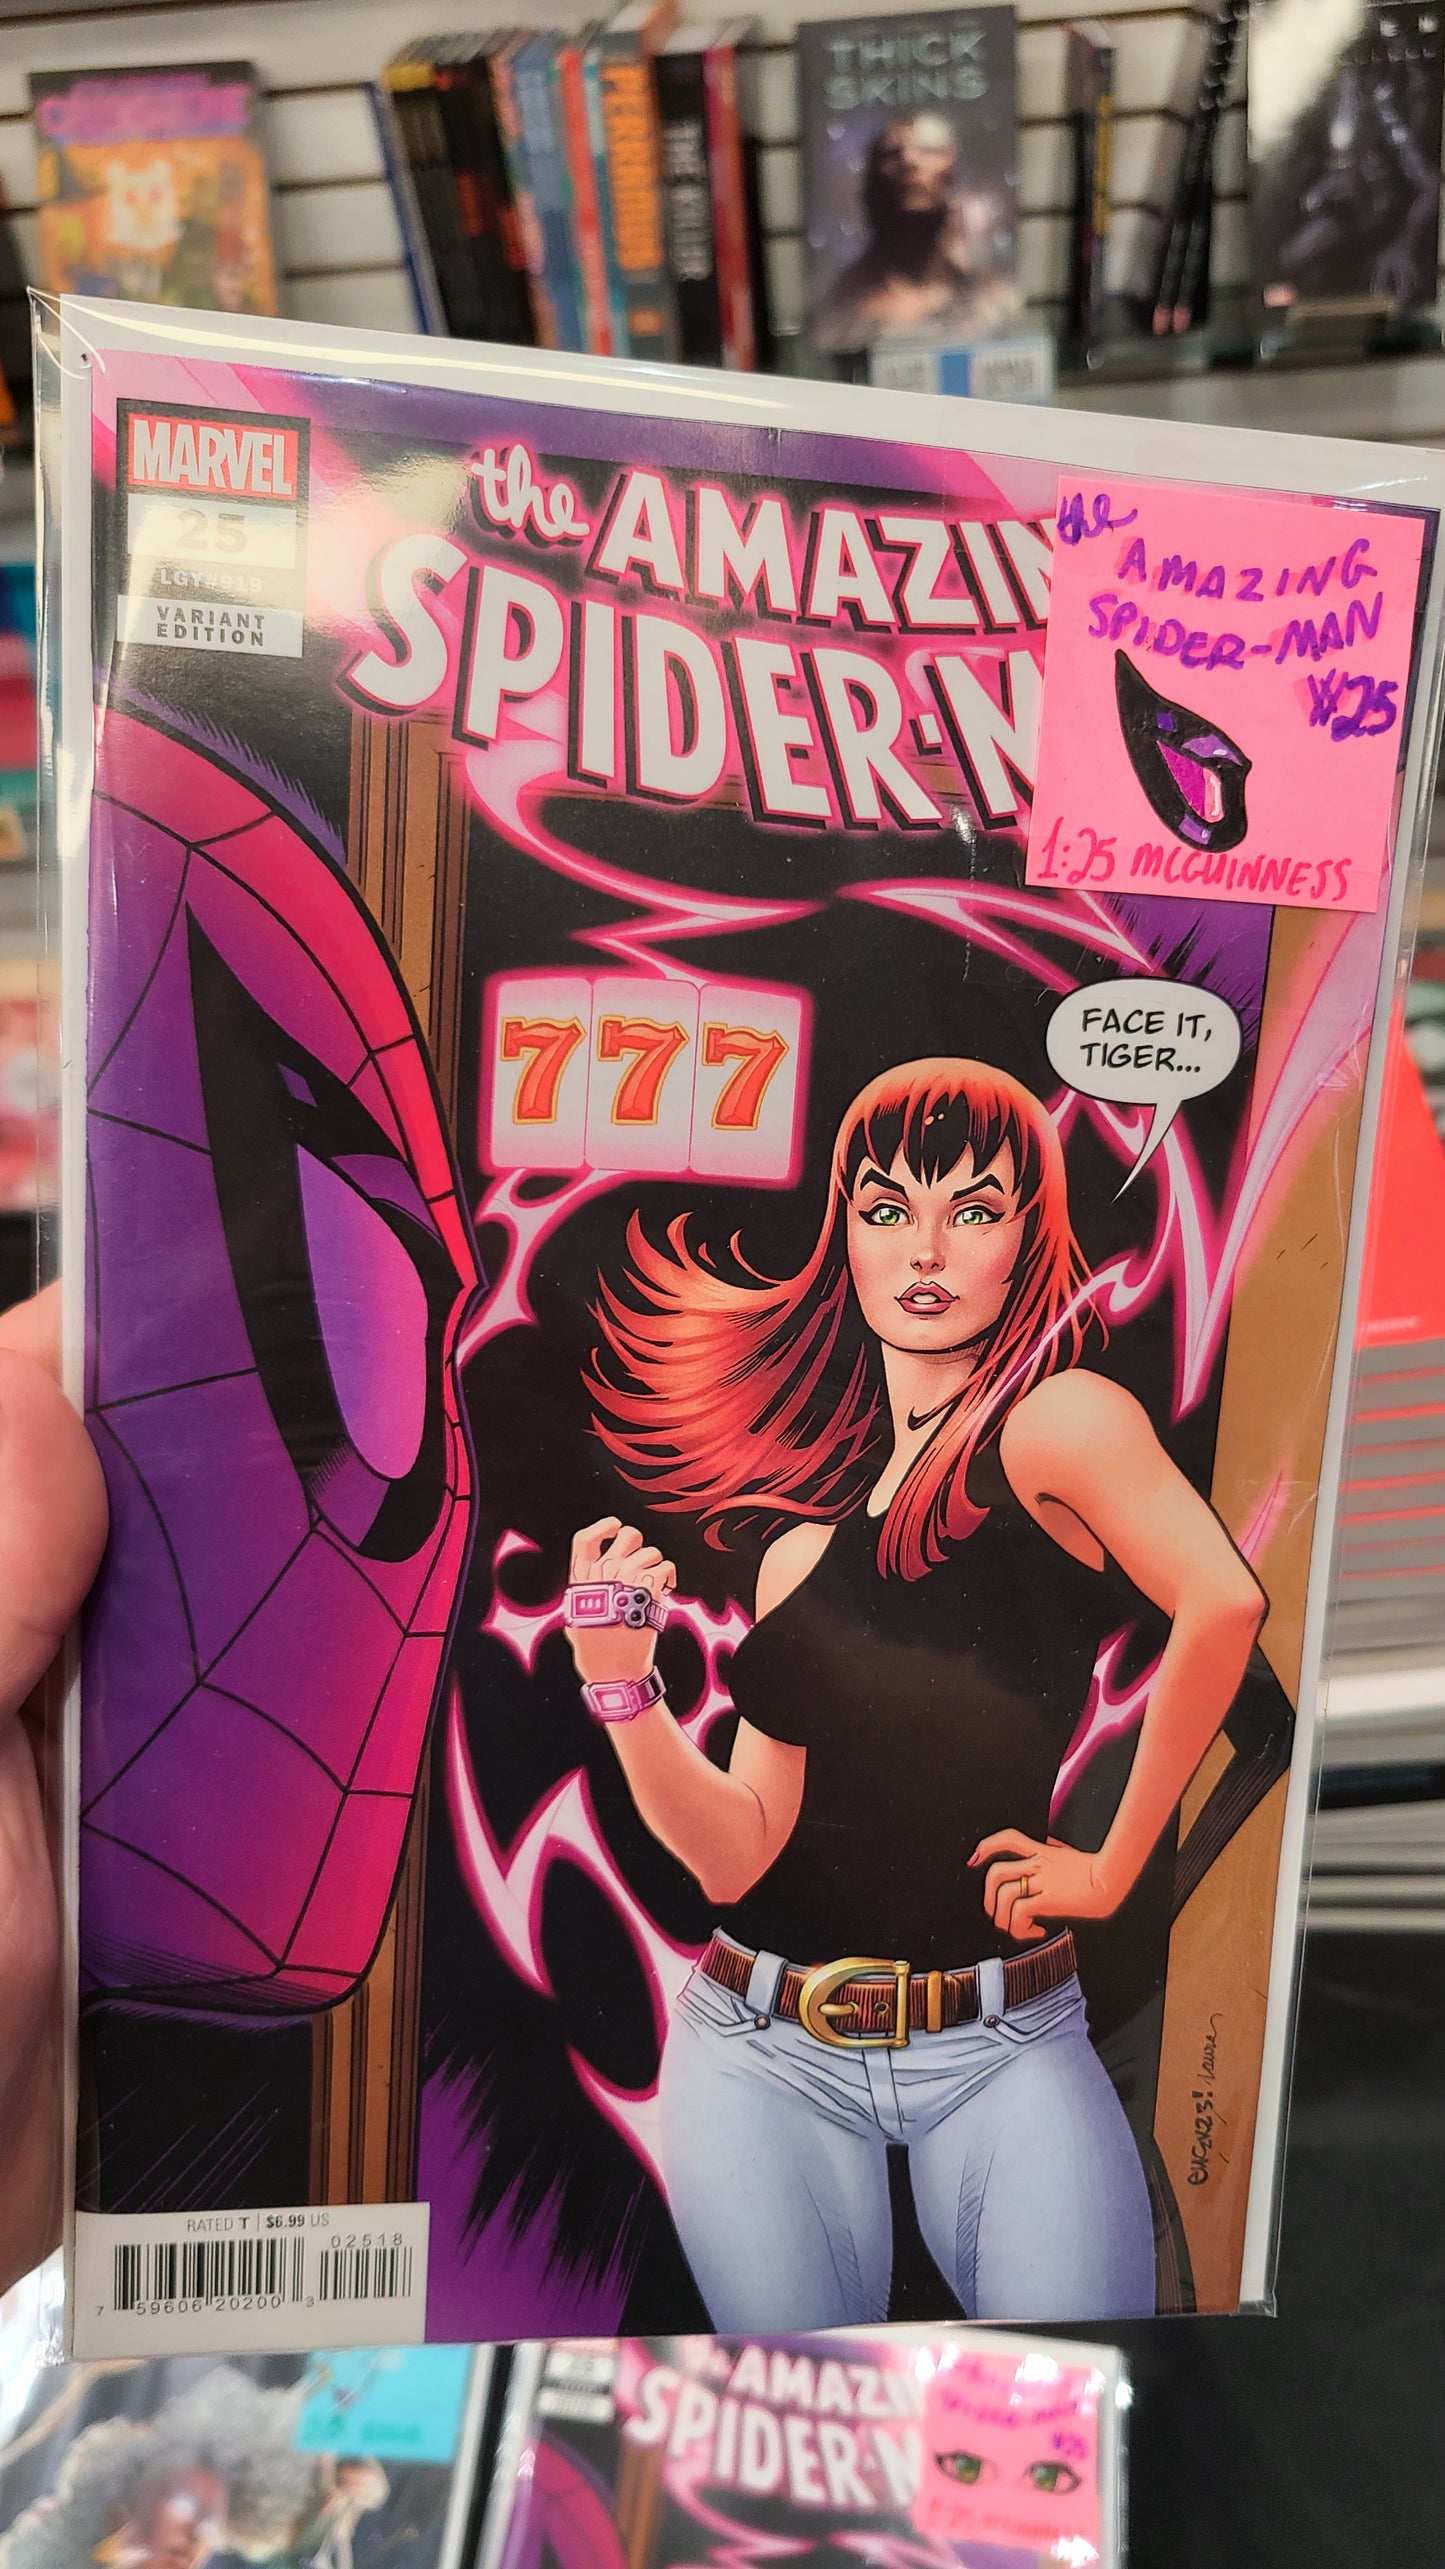 AMAZING SPIDER-MAN #25 1:25 BY ED MCGUINNESS